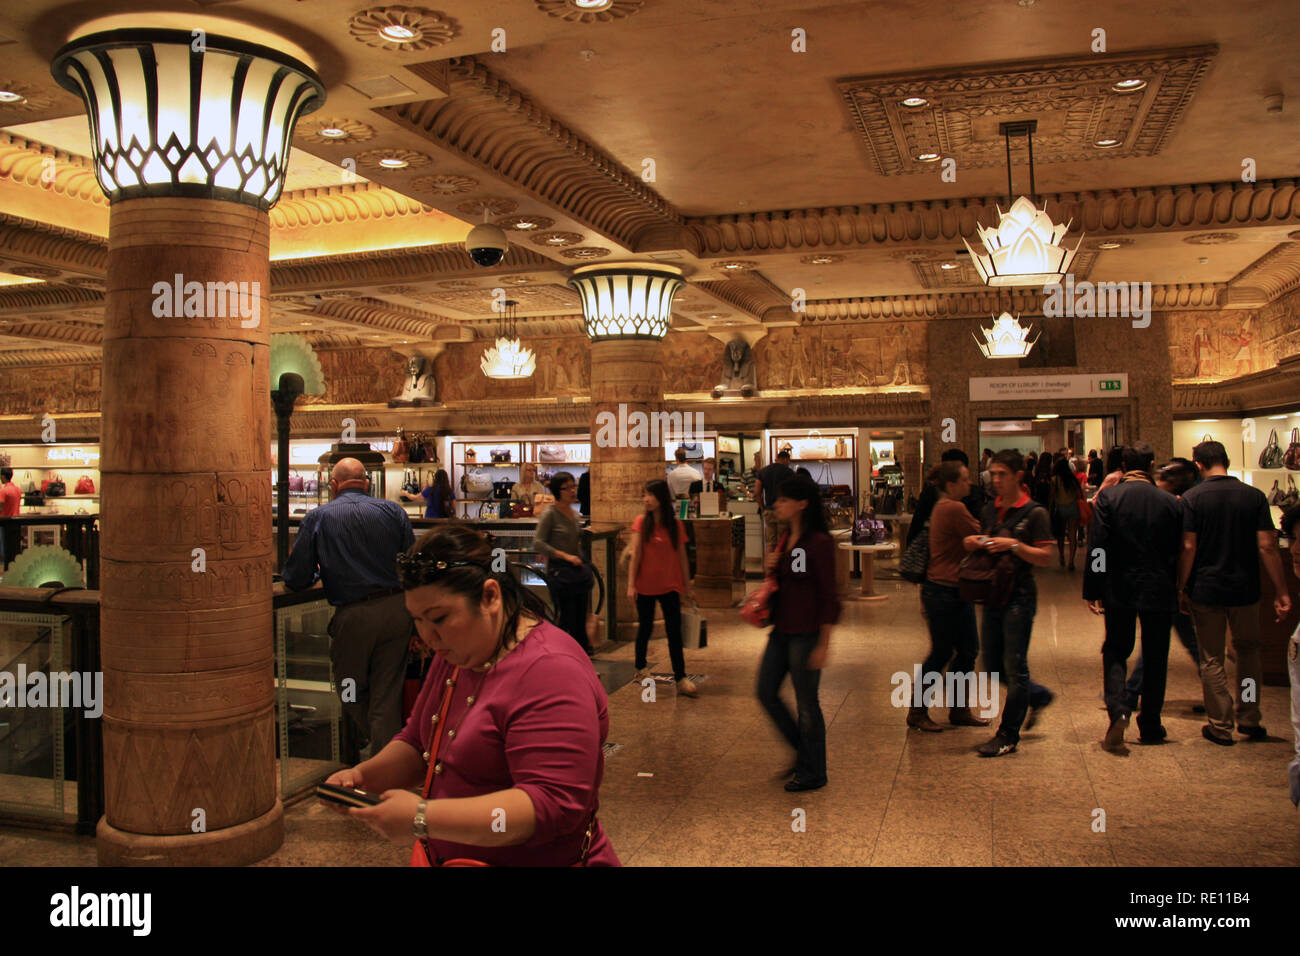 https://c8.alamy.com/comp/RE11B4/customers-and-tourists-walking-through-the-ancient-egypt-themed-clothing-department-at-harrods-london-united-kingdom-RE11B4.jpg